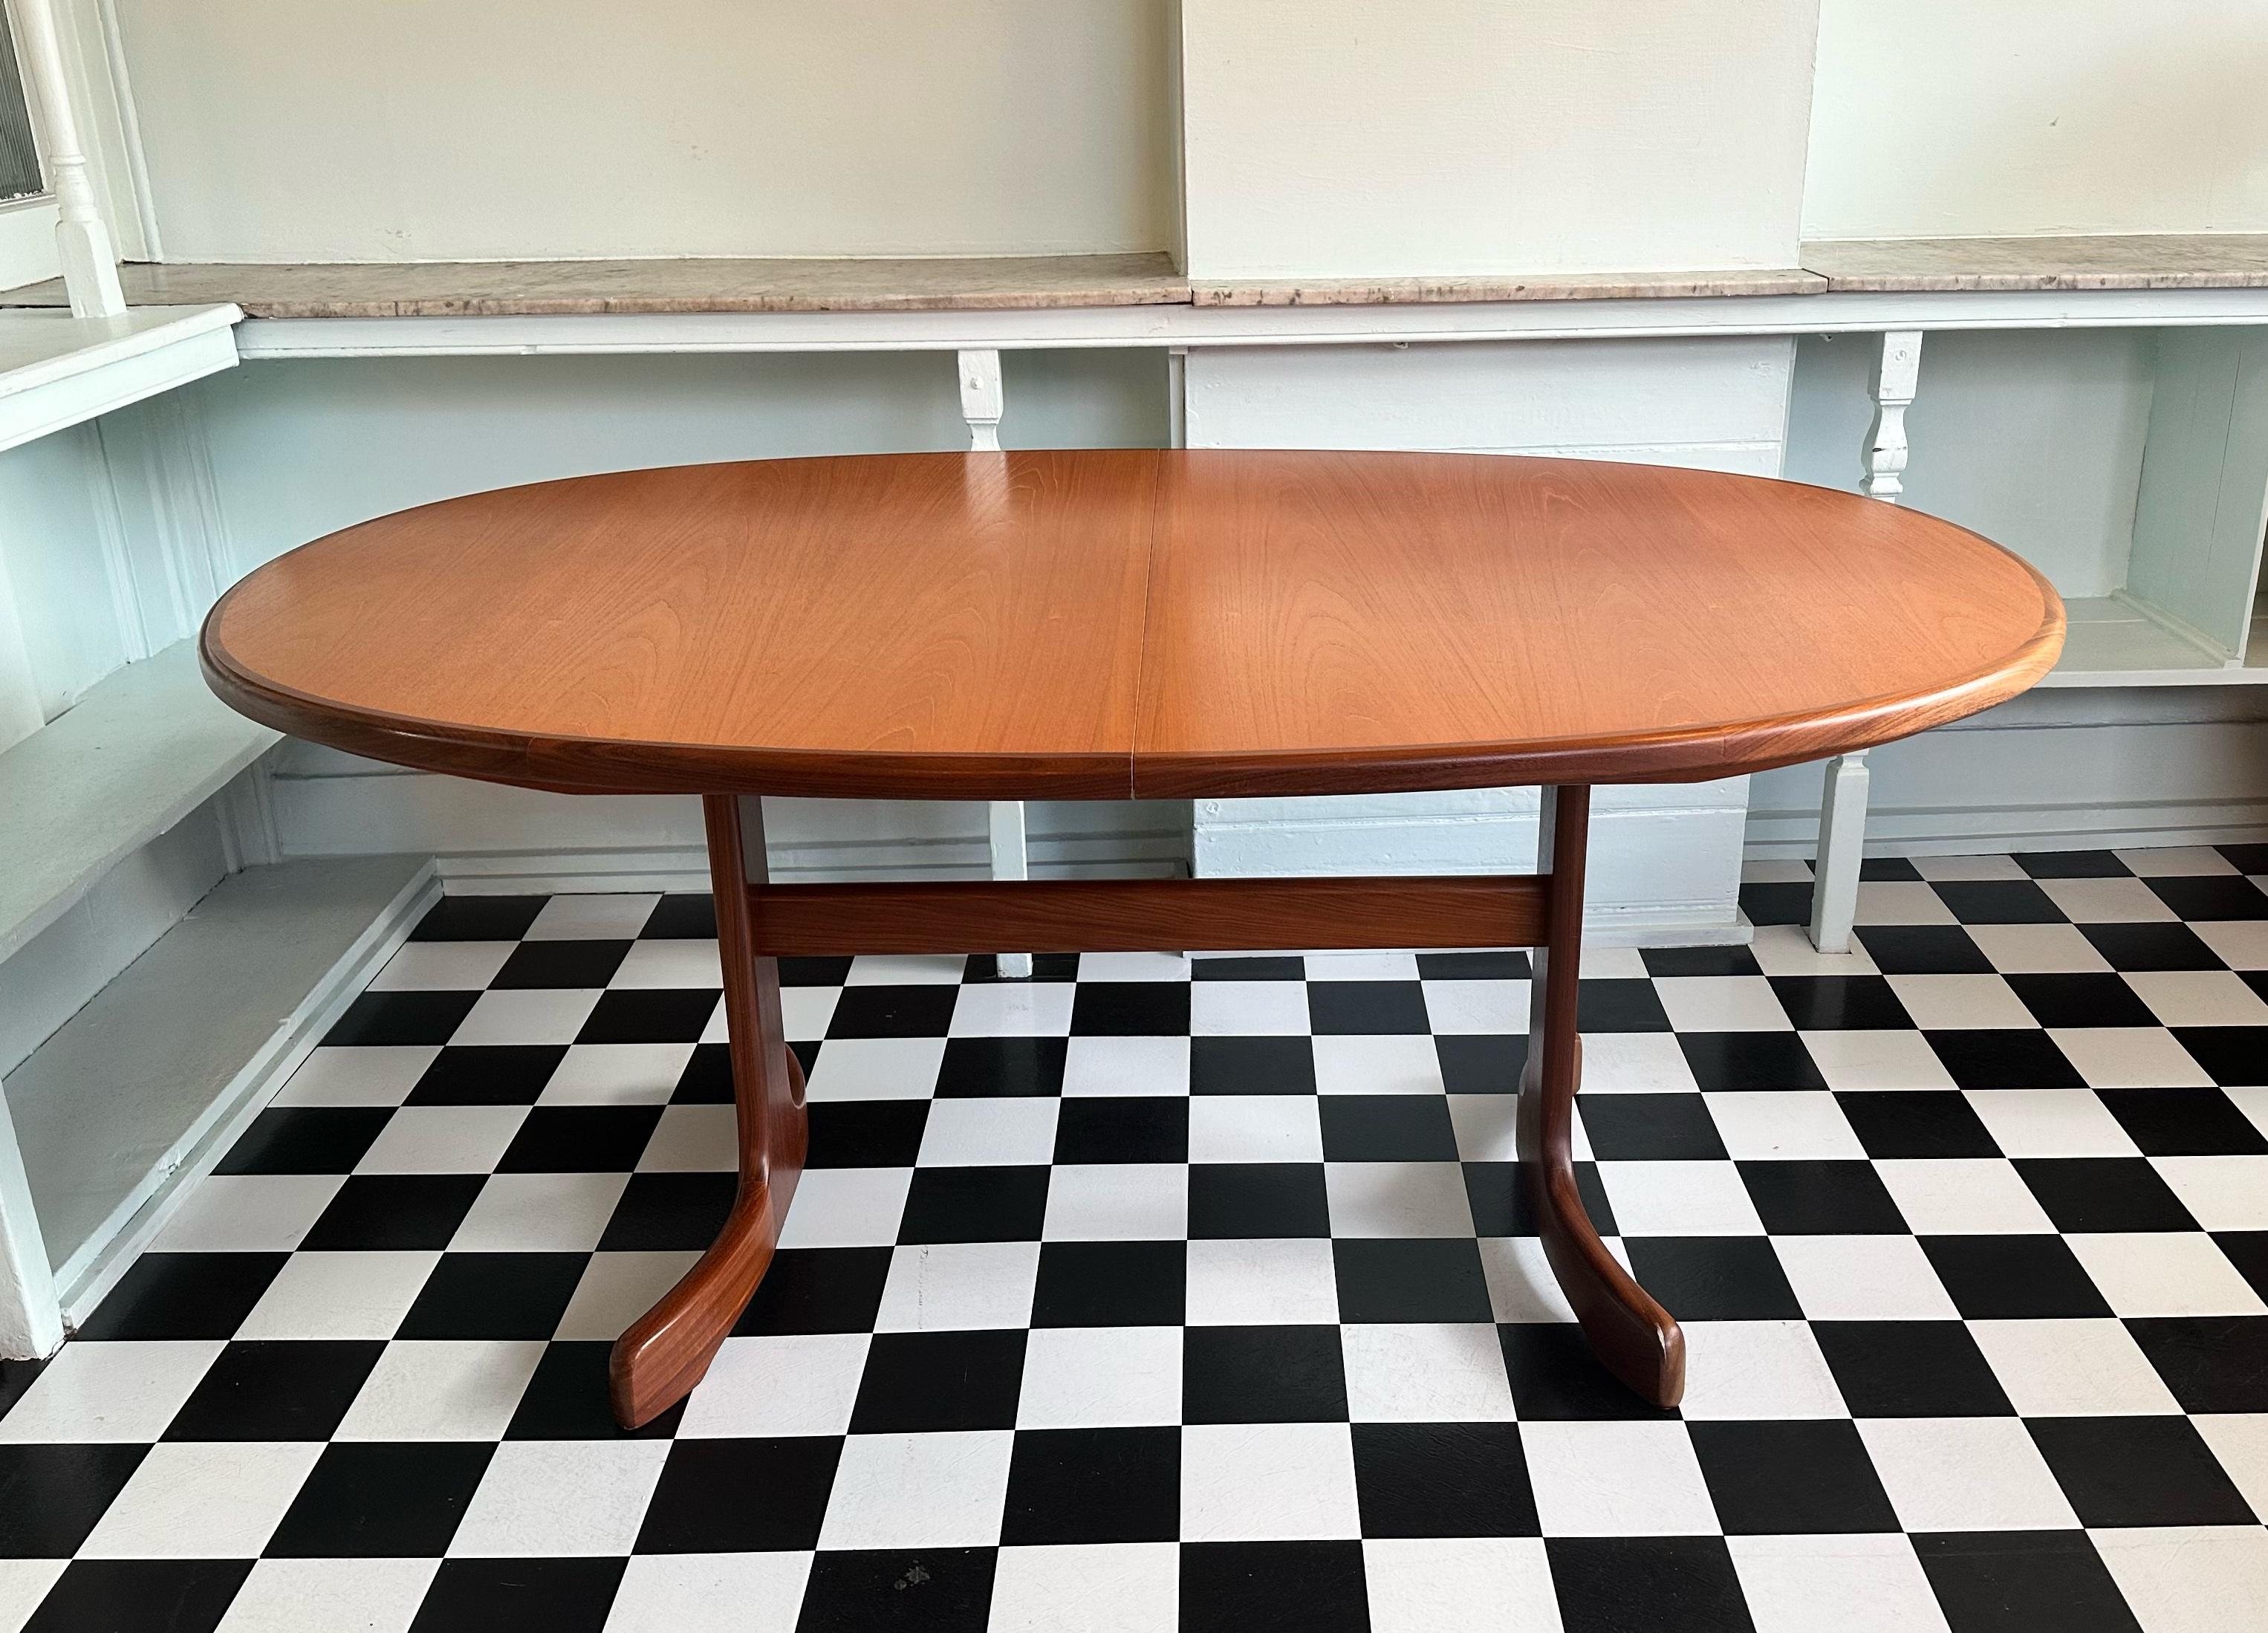 Beautiful mid-century G Plan Fresco teak oval dining table. Immaculate, like new condition, has been very well looked after by one previous owner. This table looks as close to the day when it was purchased as it could possibly be, which is so rare